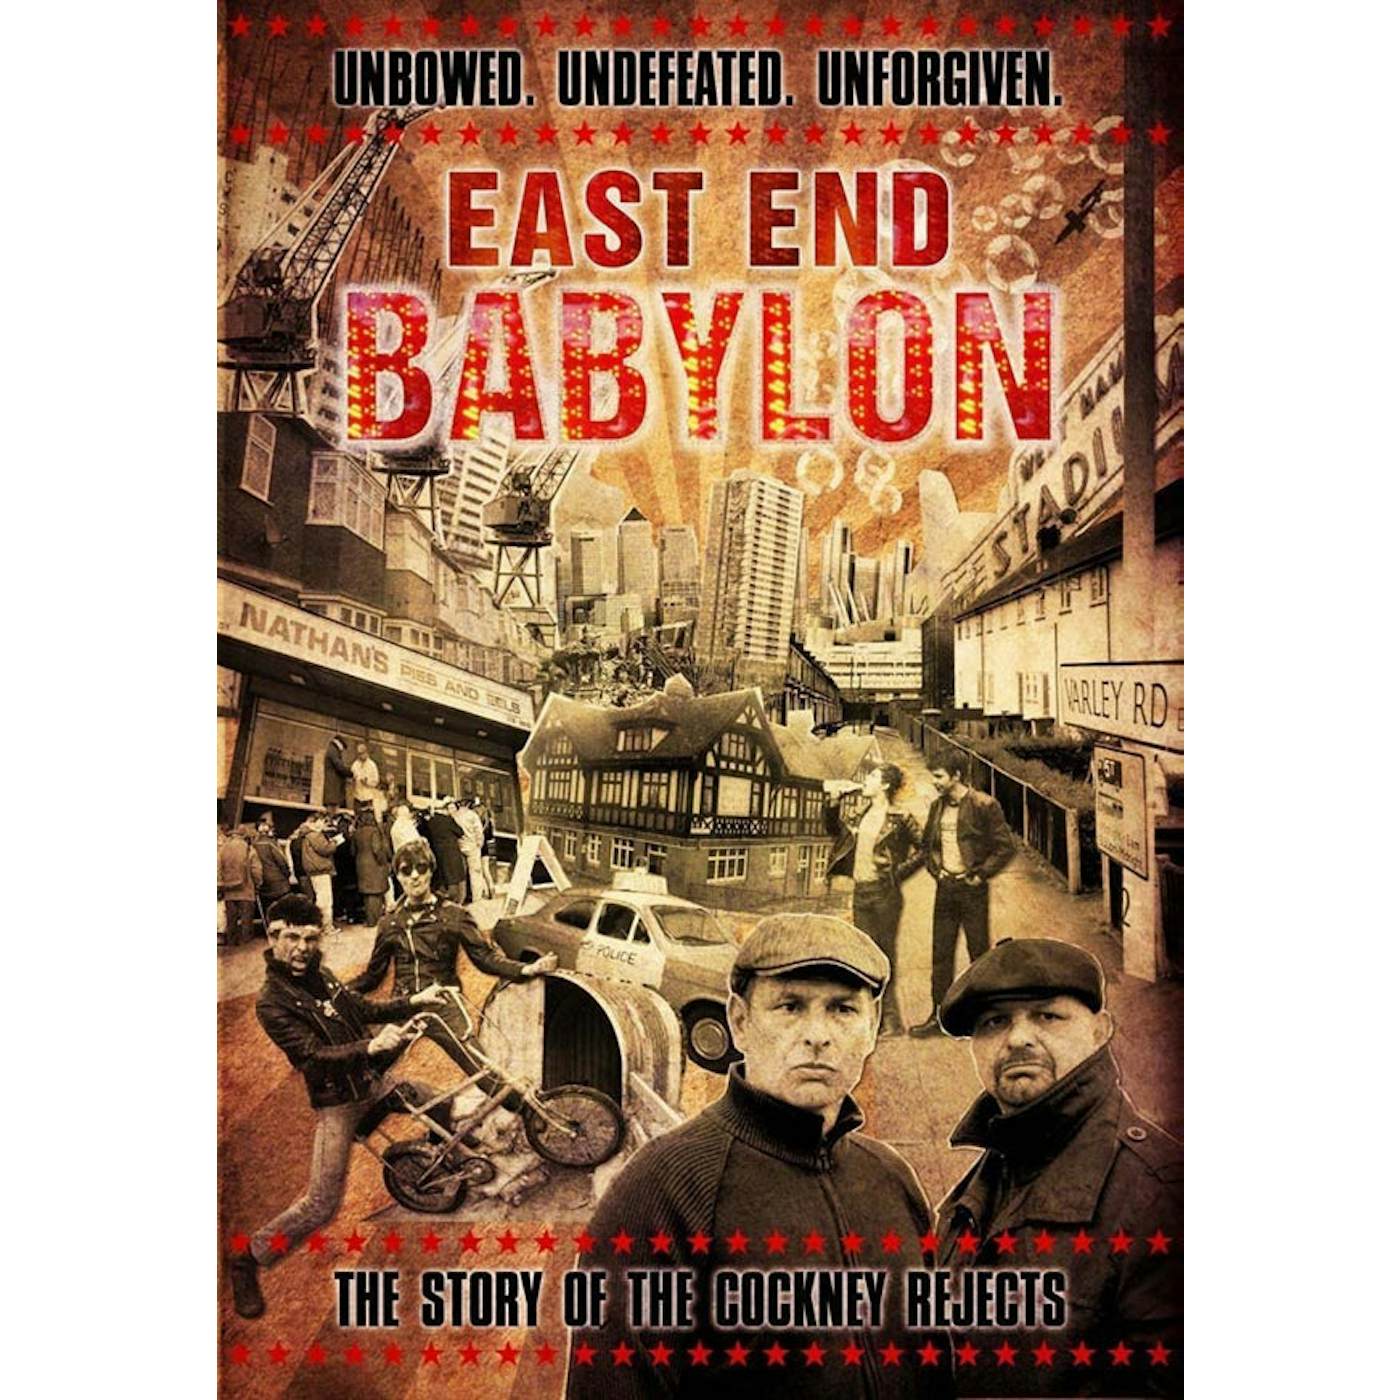 Cockney Rejects DVD - East End Babylon - The Story Of The Cockney Rejects